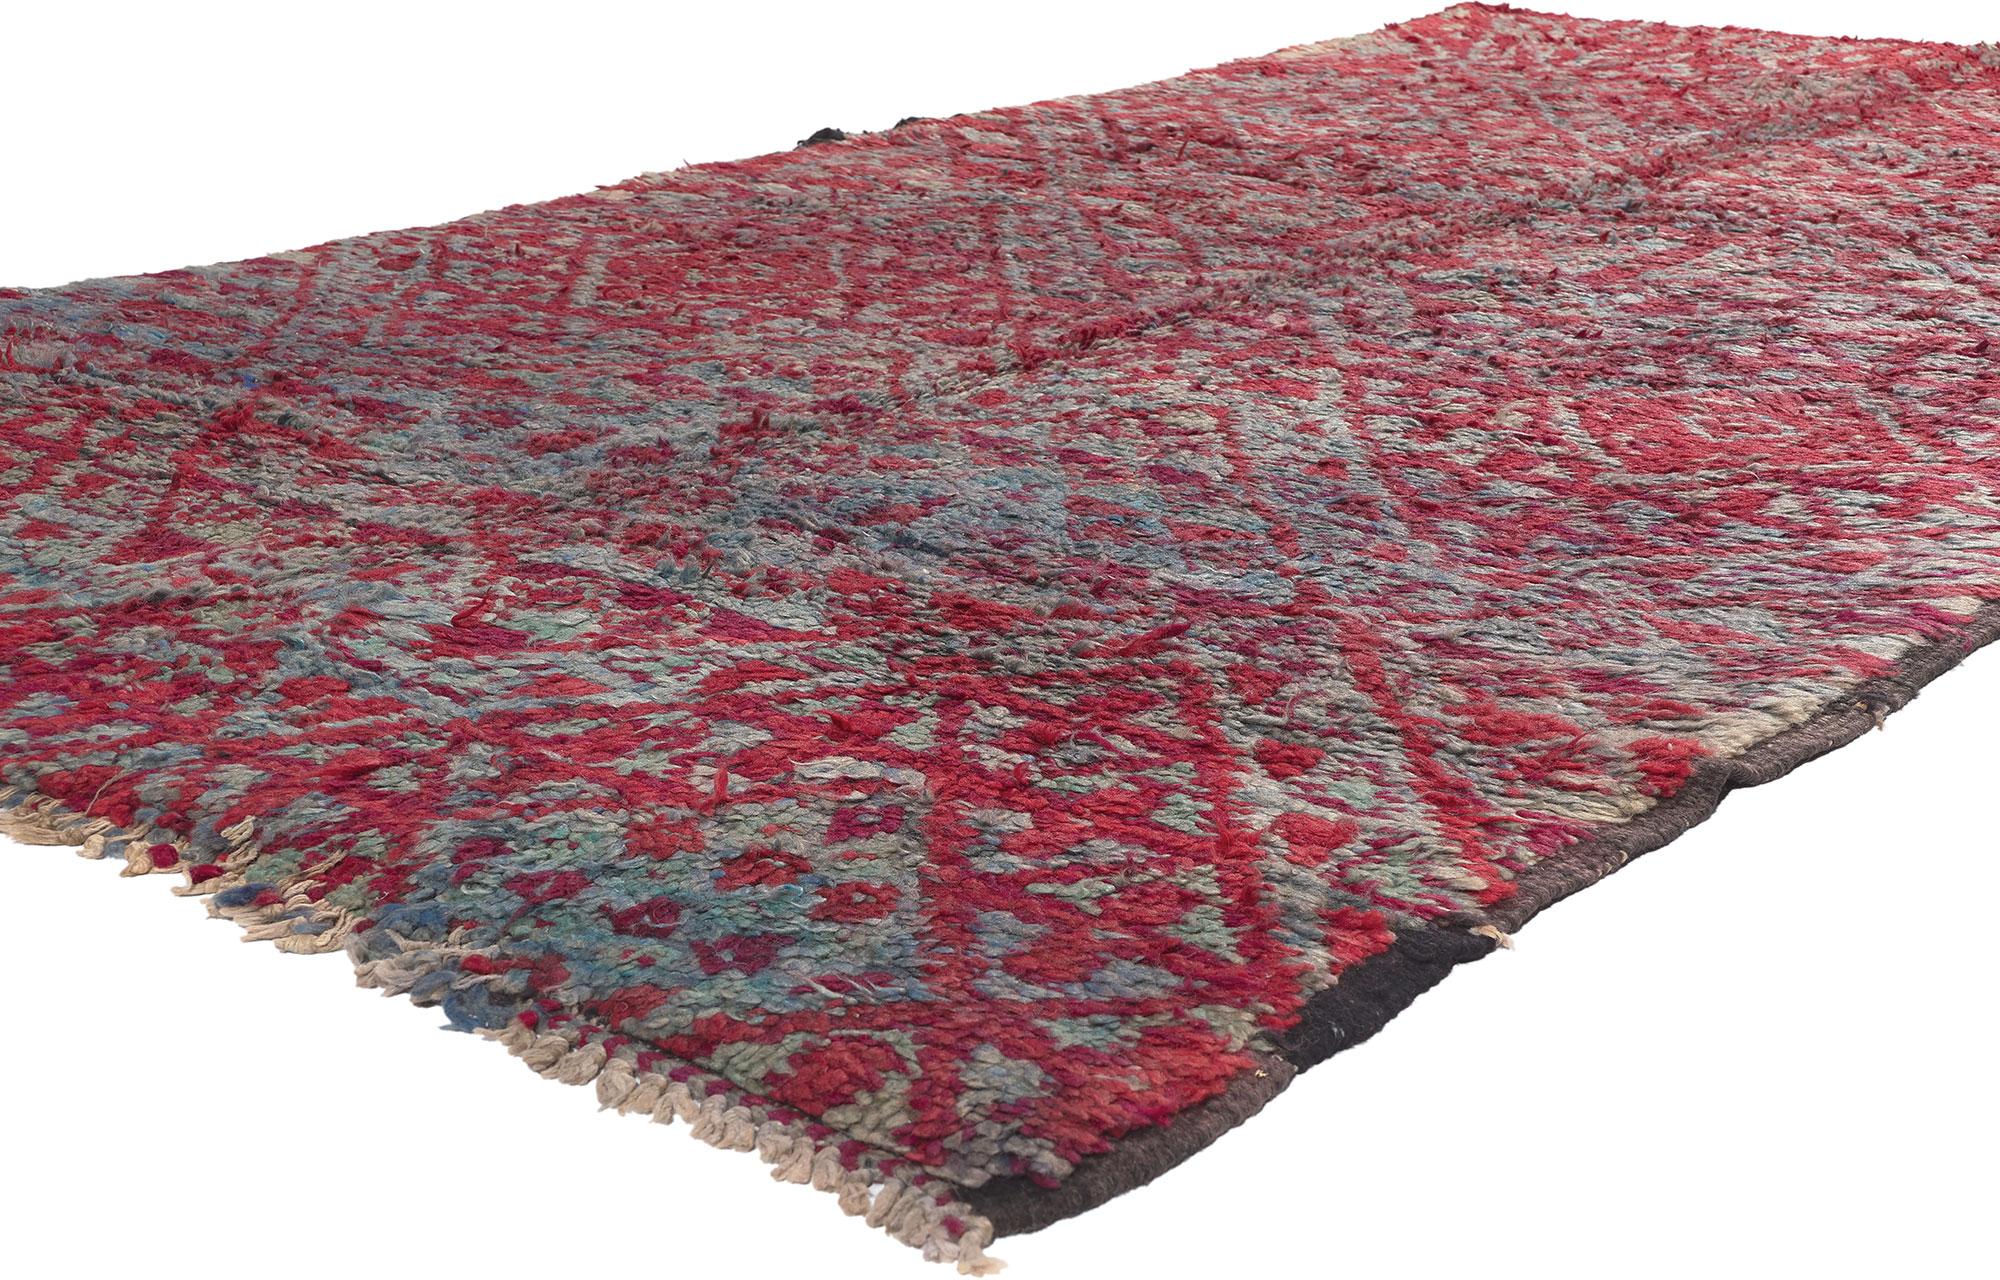 20699 Vintage Beni MGuild Moroccan Rug, 05'09 x 10'09. Embark on a journey through the captivating world of Maximalist aesthetics as you explore the charm of this hand-knotted wool vintage Beni Mguild Moroccan rug—a masterpiece born in the western